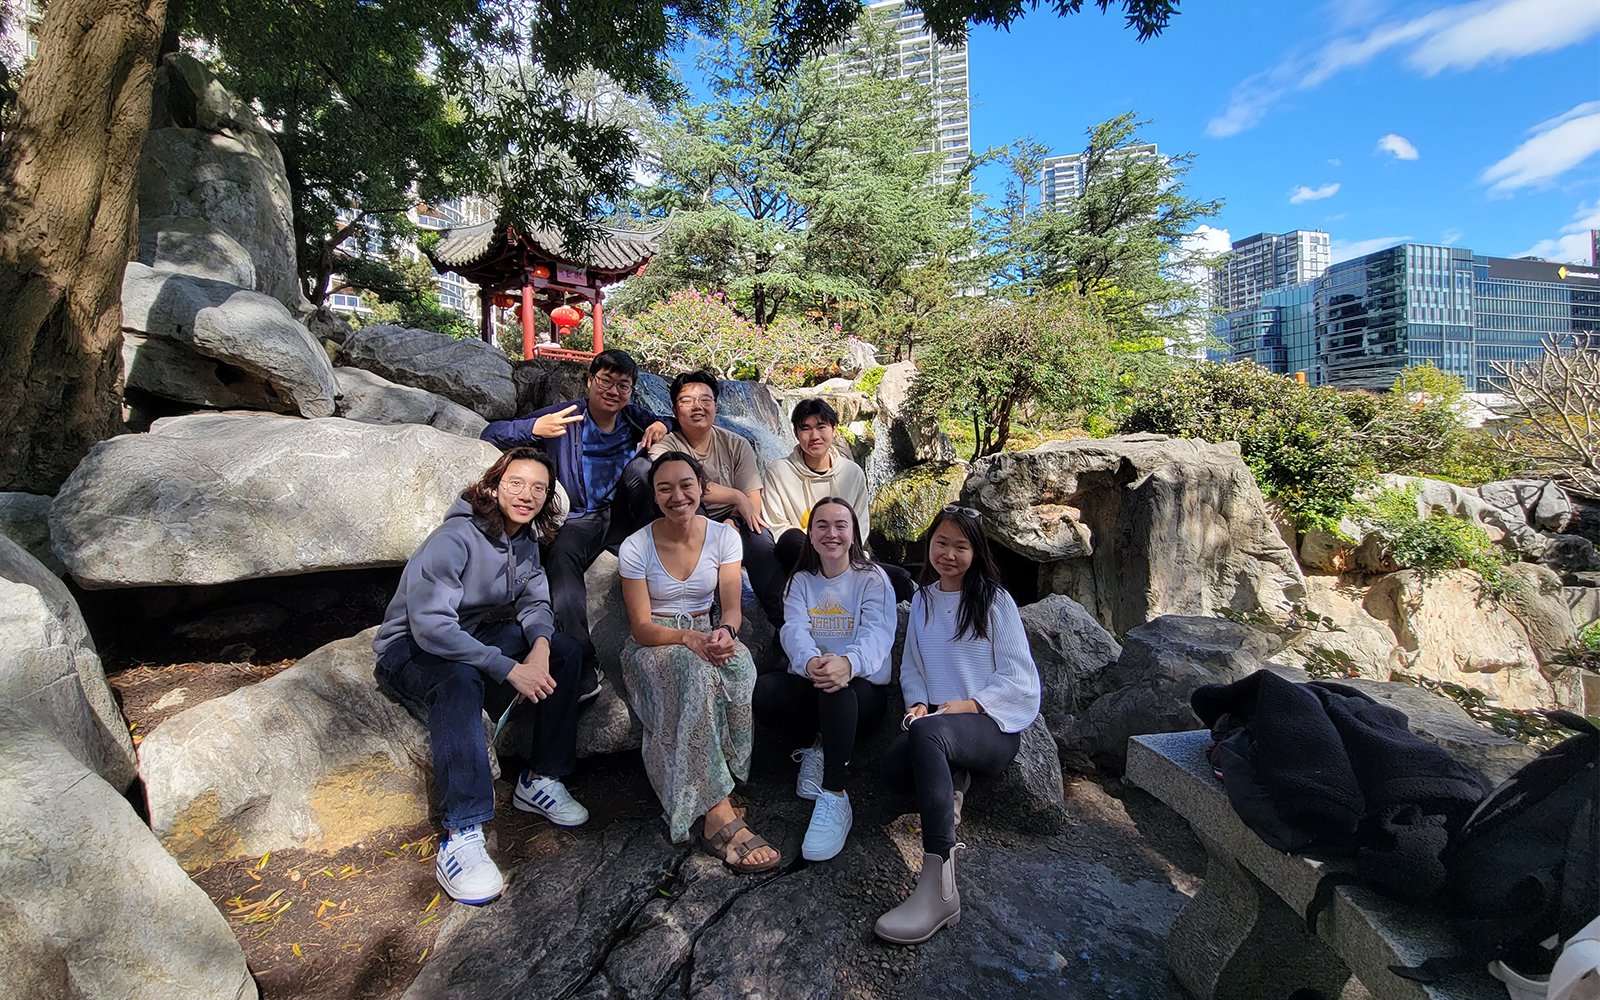 Group of students sitting on rocks with shrine and city in background